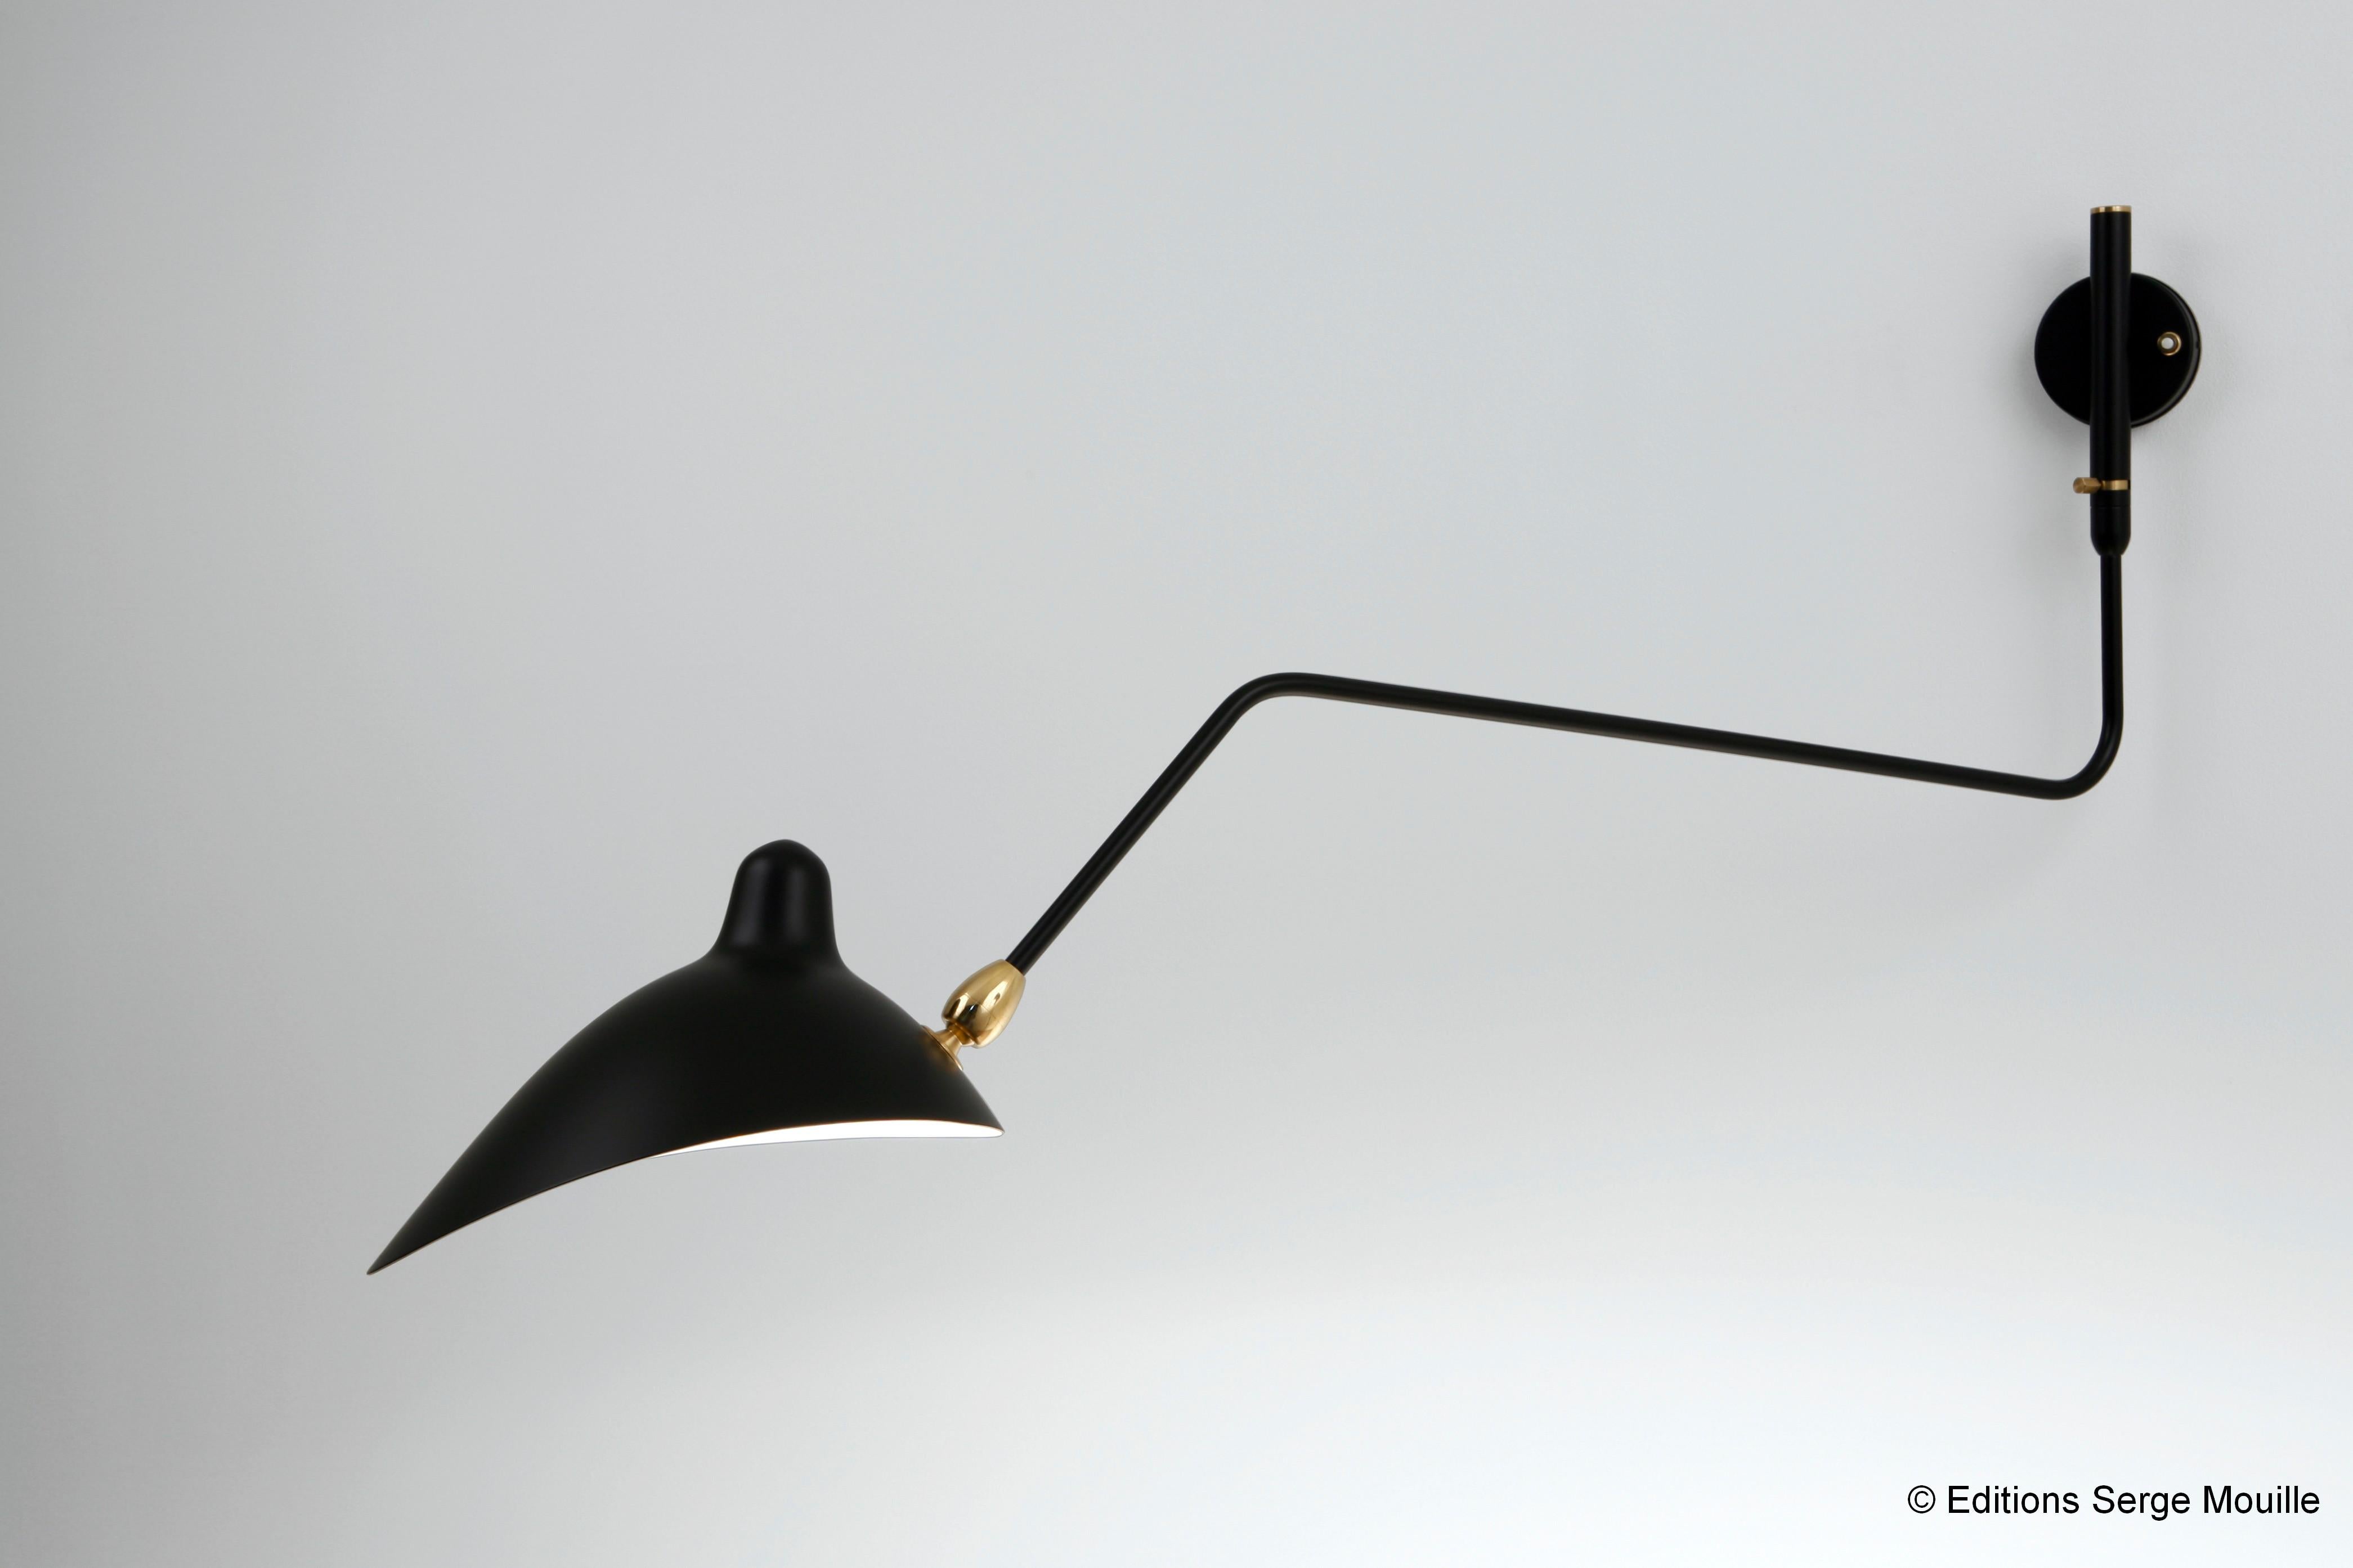 Sconce 1 rotating curved arm by Serge Mouille
Dimensions: D99 x H40 cm
Materials: Brass, Steel, Aluminum
One of a King. Numbered.
Also available in different color.

All our lamps can be wired according to each country. If sold to the USA it